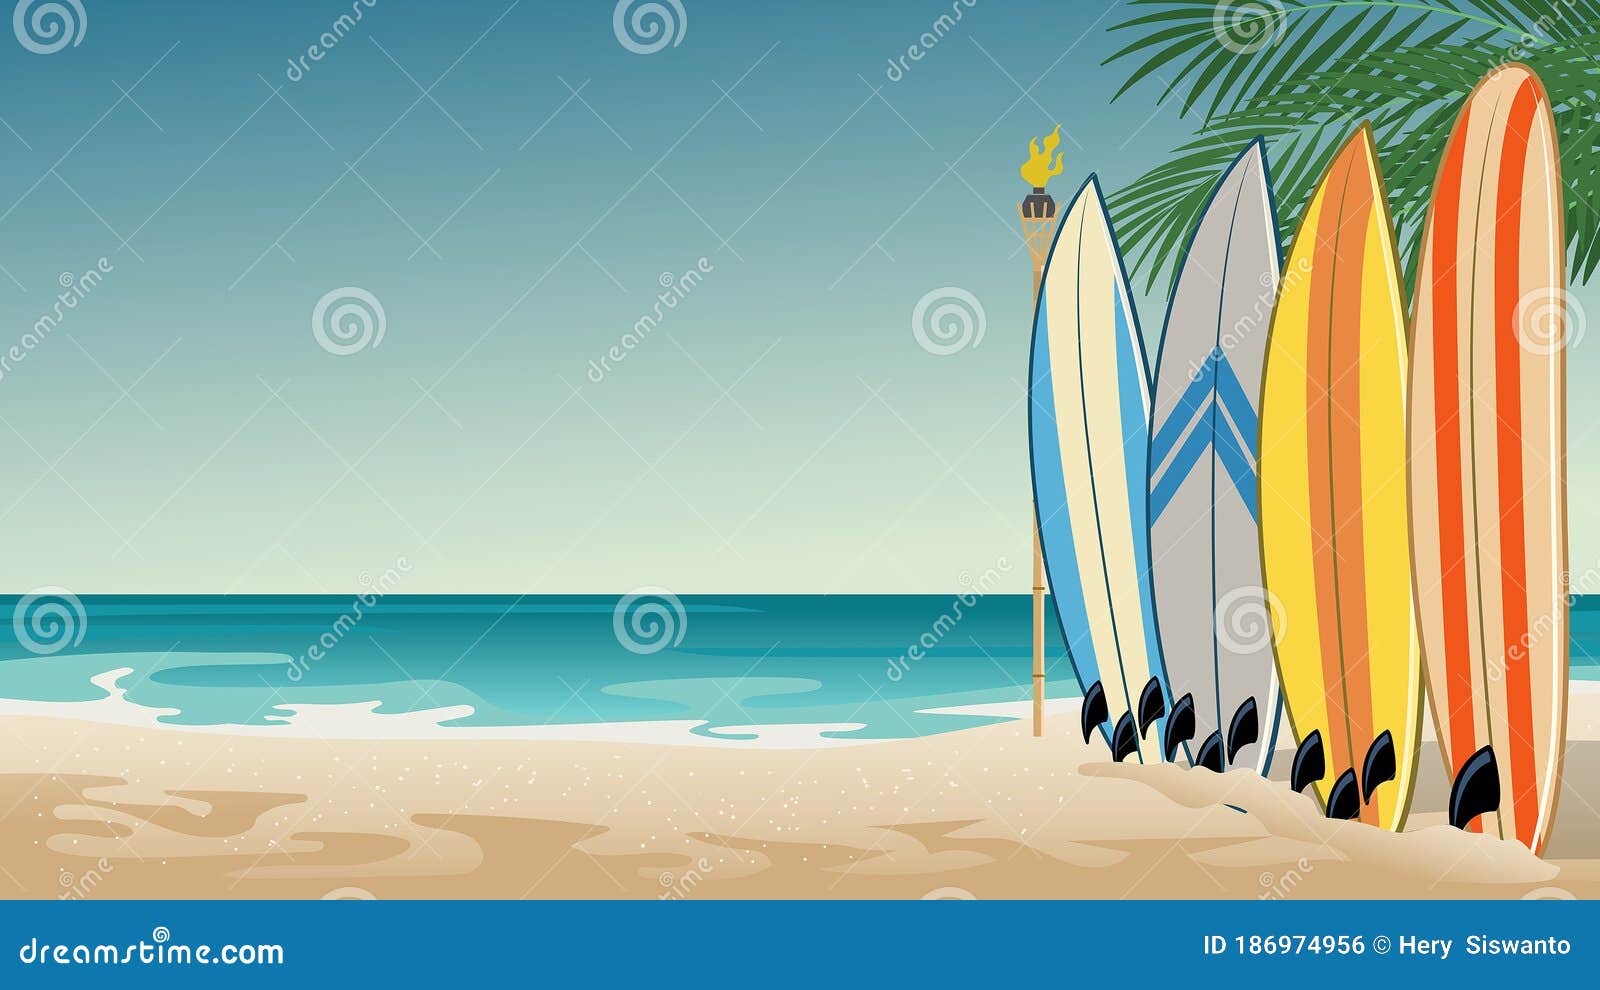 landscape of beach with some surfboards